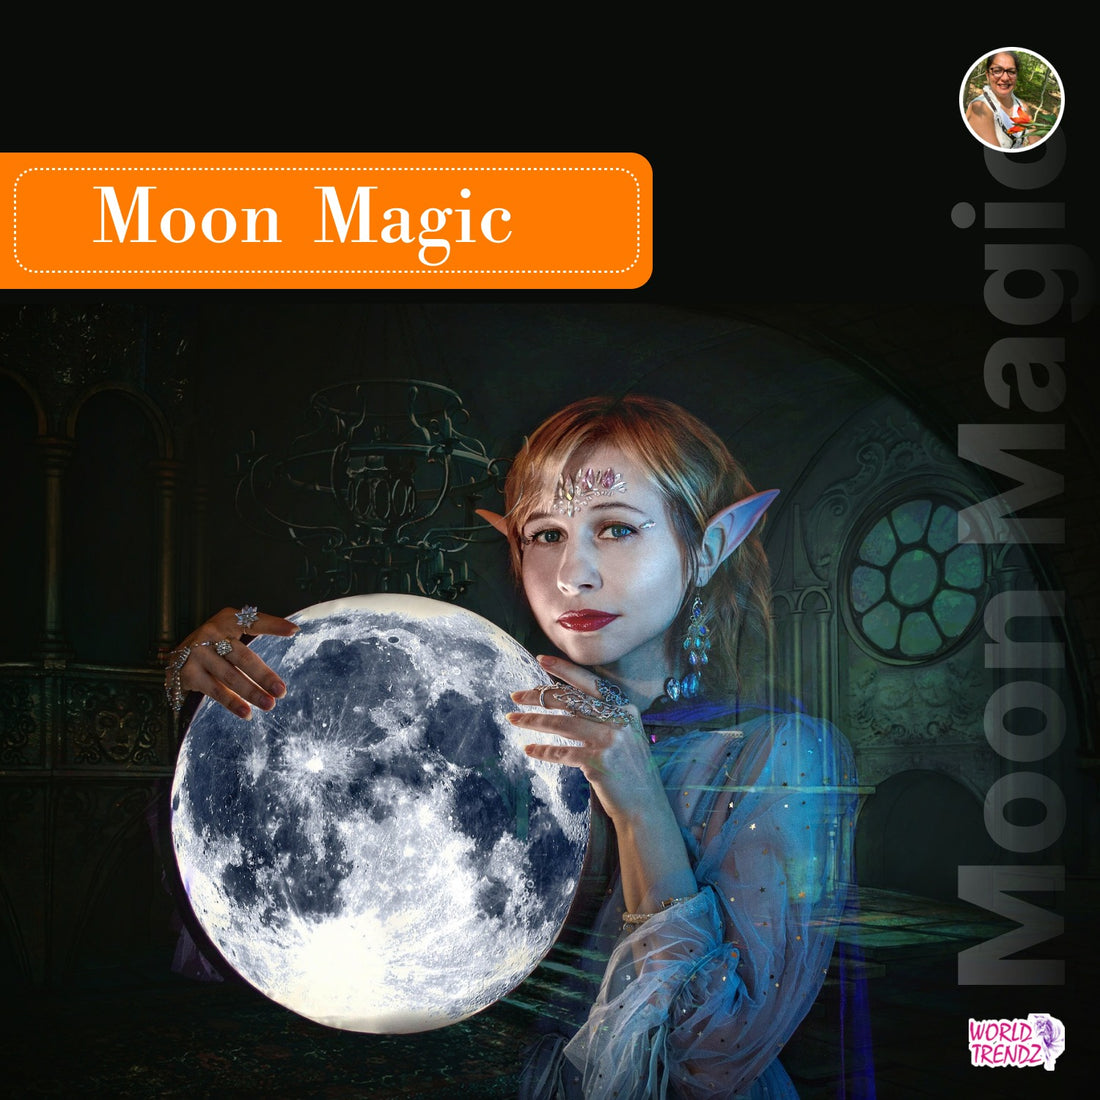 Will Moon Magic Ever Die?